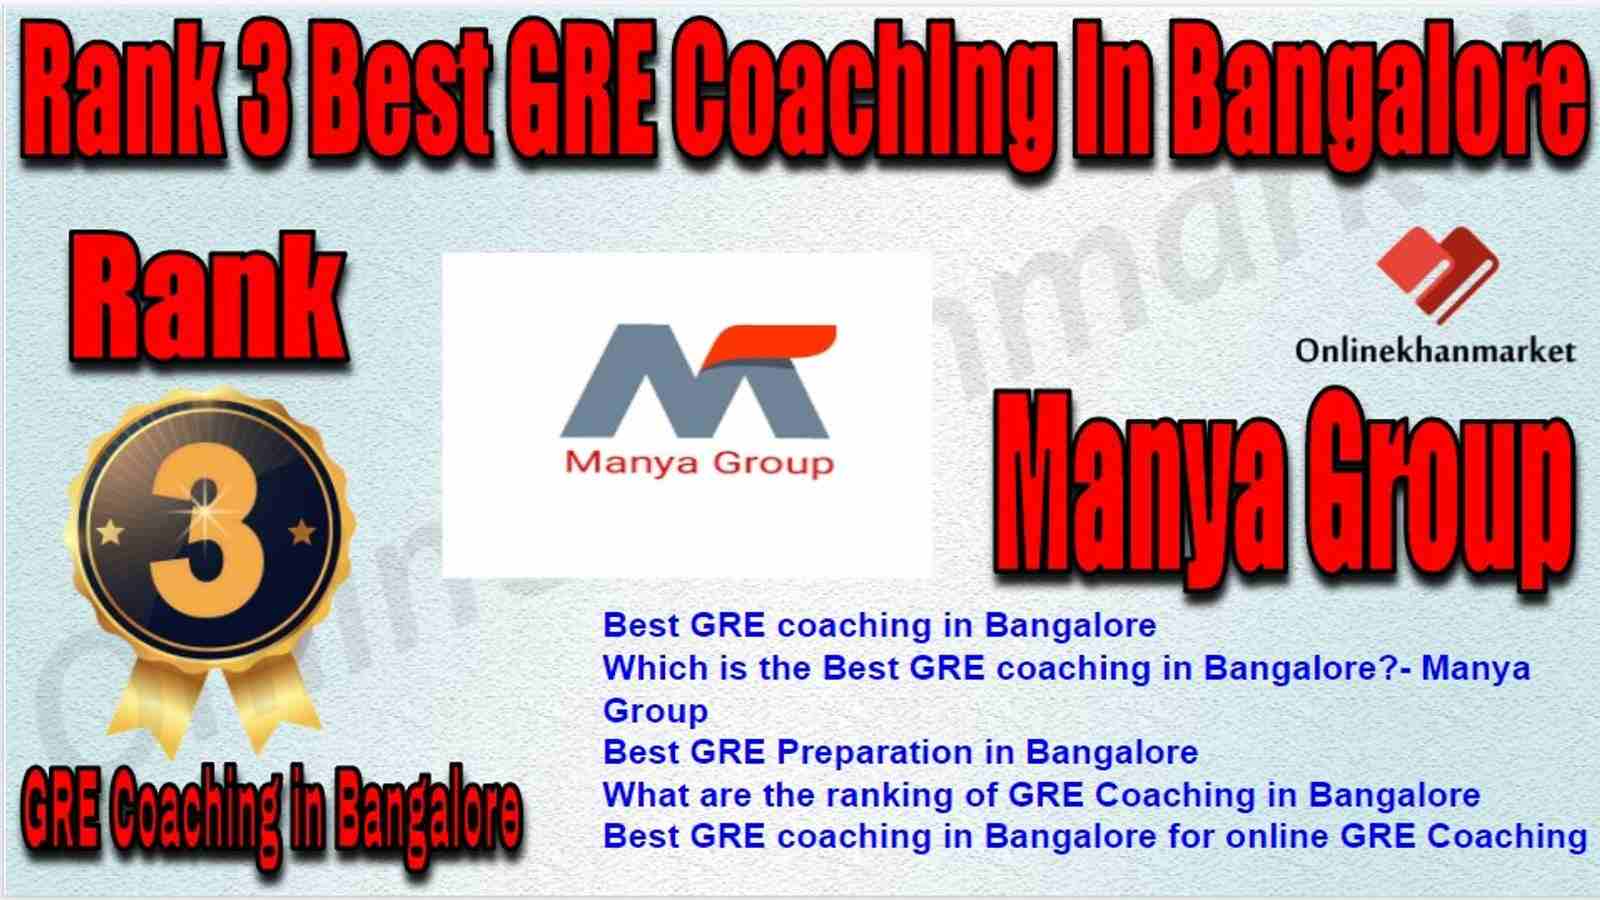 Rank 3 Best GRE Coaching in Bangalore